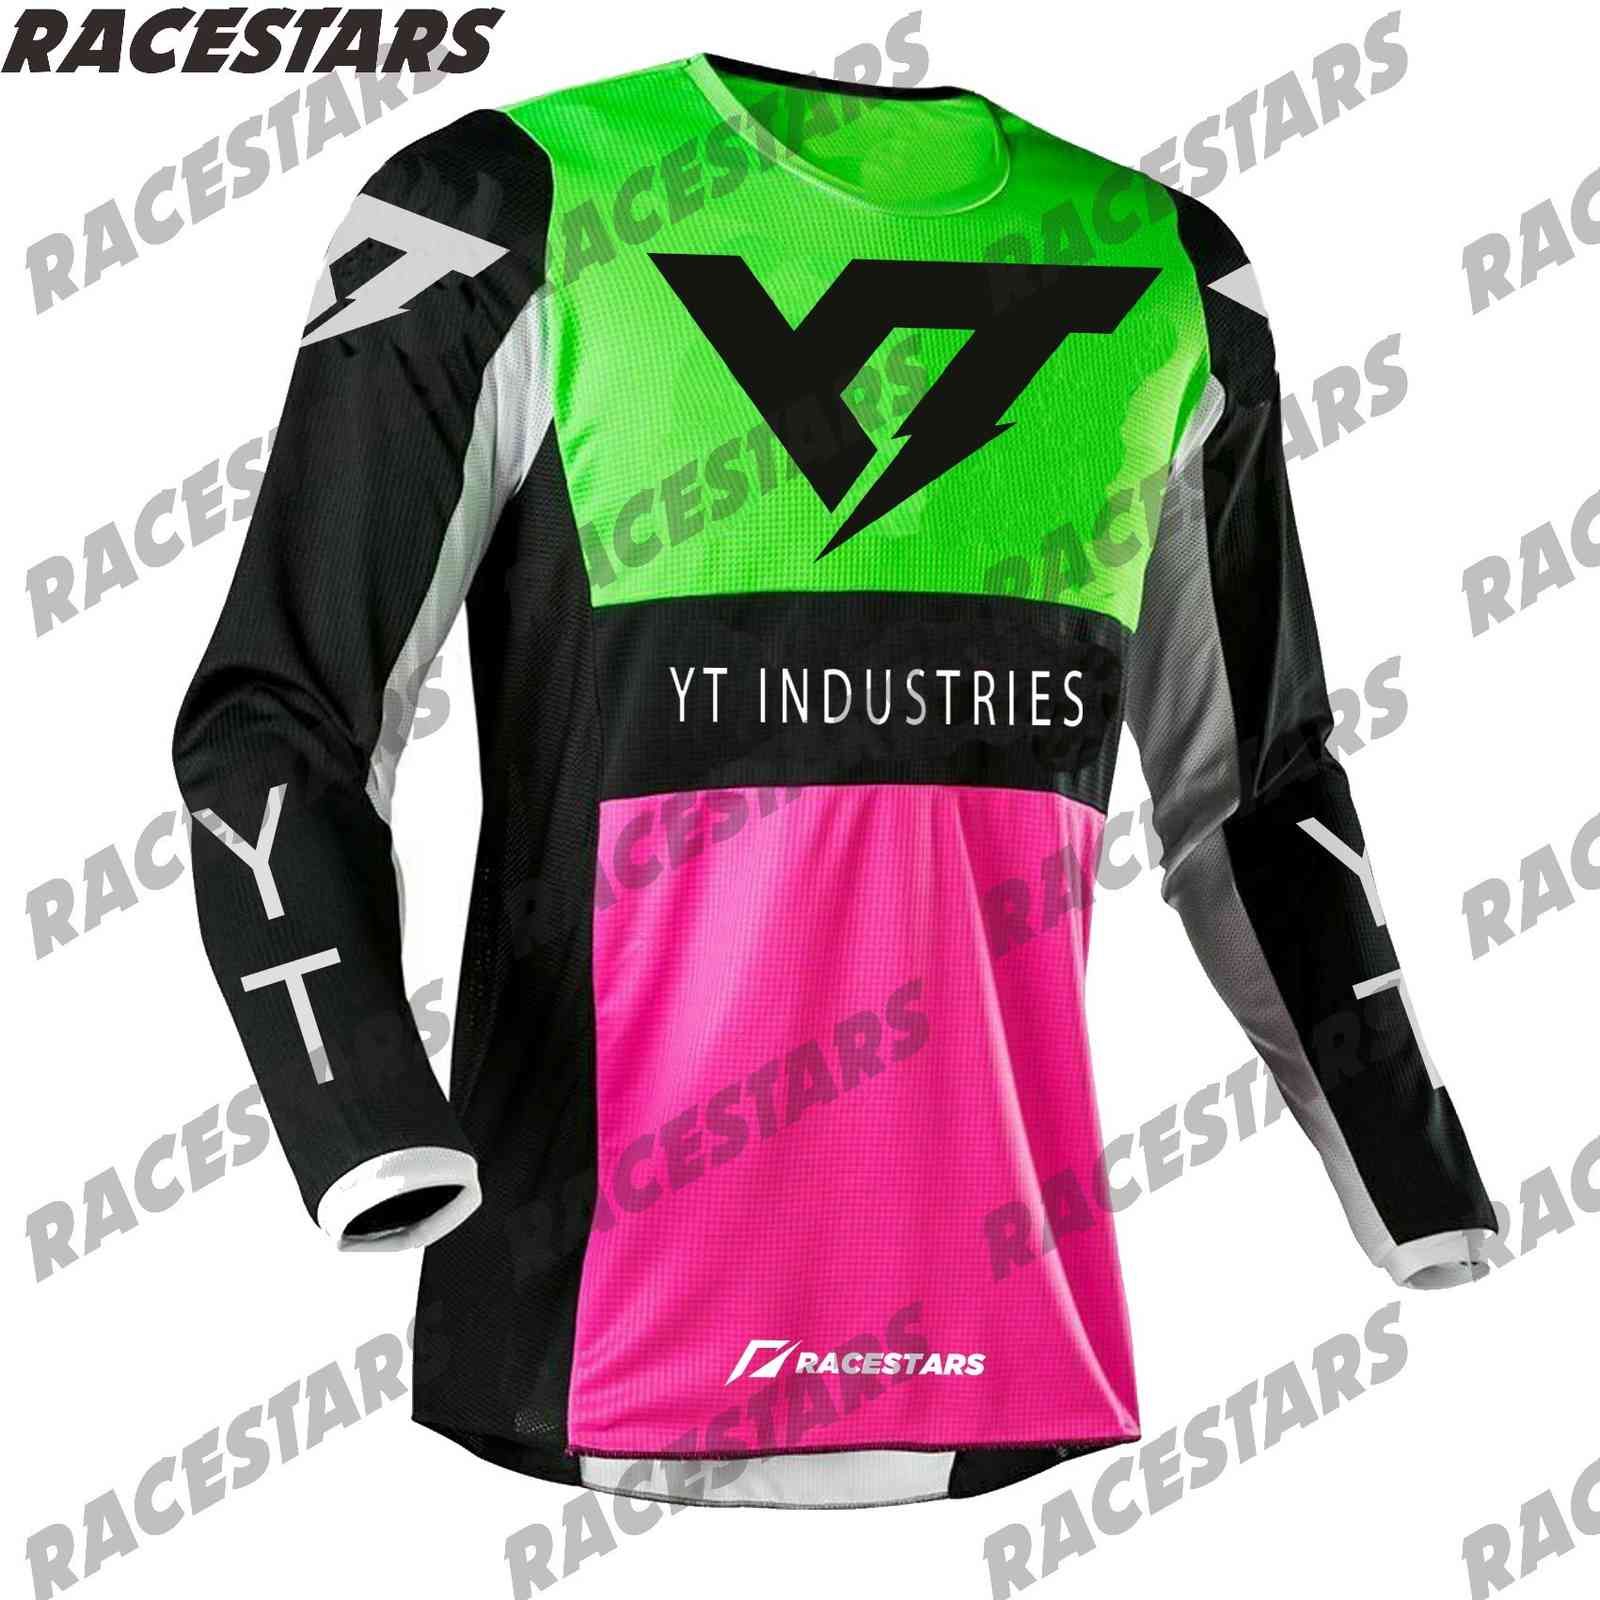 YT Downhill MTB Jersey Ciclismo Ropa Equipo Pro Spexcel Maillot Ciclismo Bike Jersey X0503 De 33,4 € | DHgate